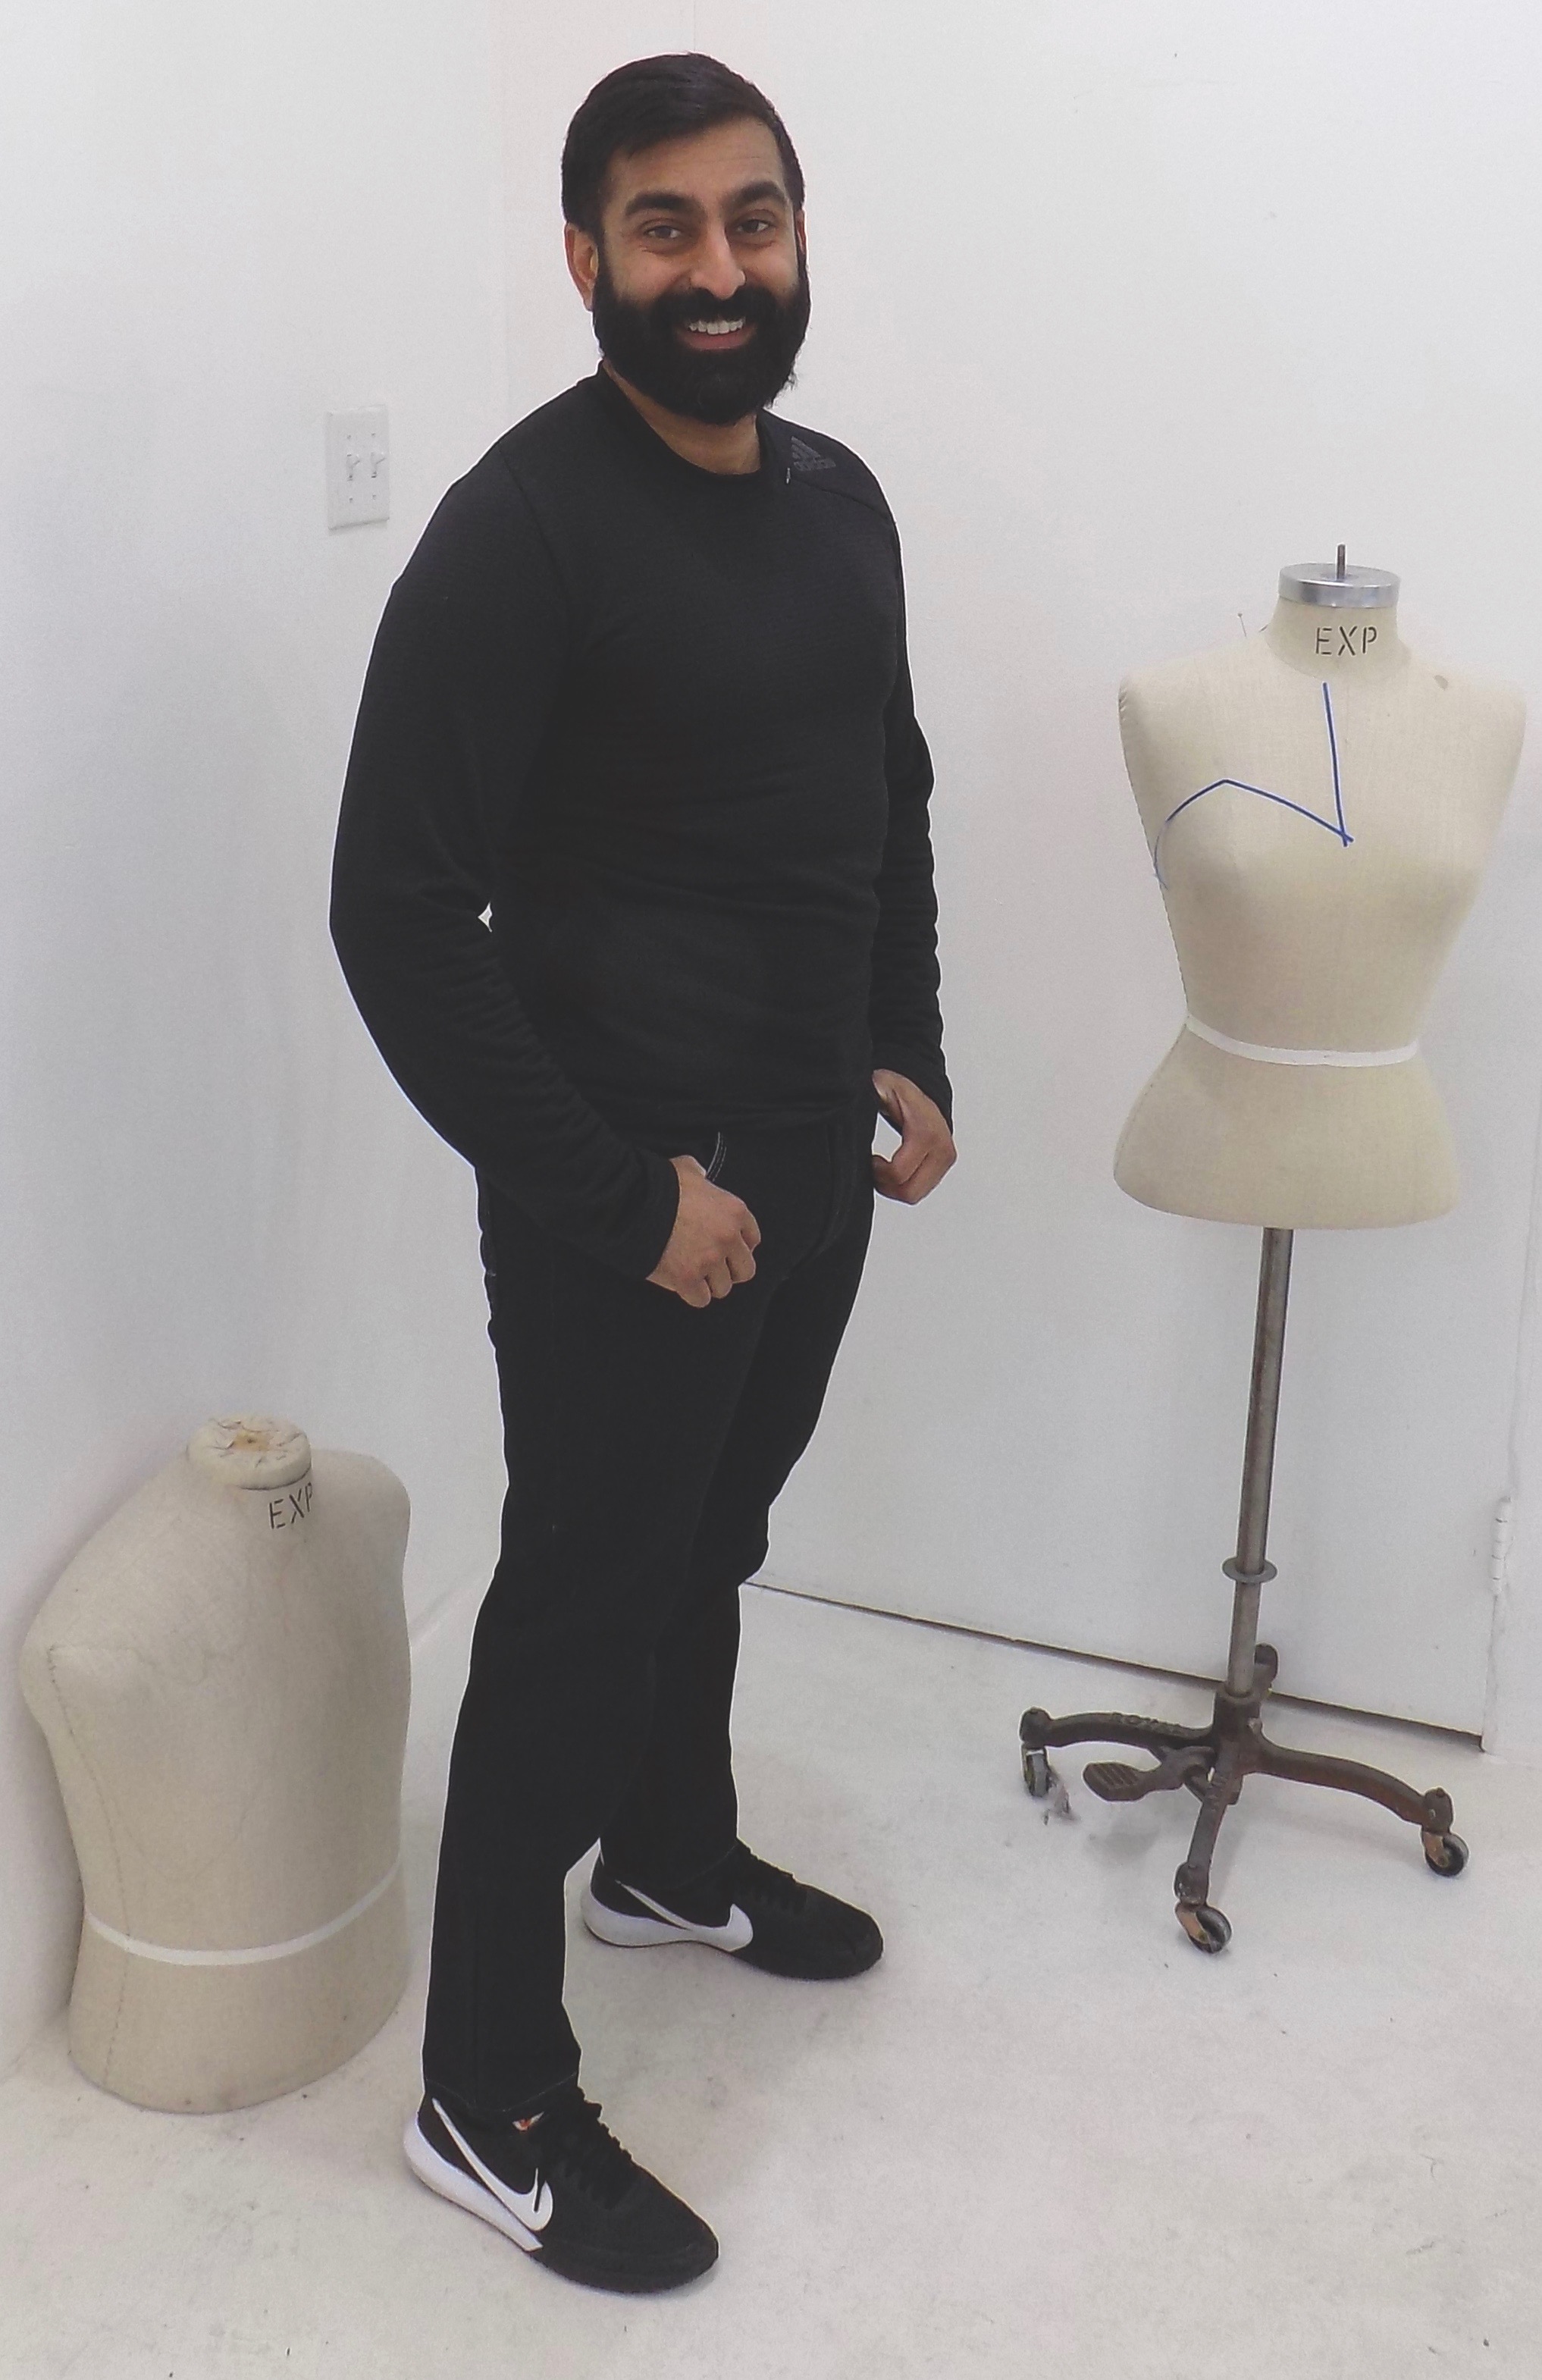 Sewing classes in chicago: tchad: workroom: studio: student project: ankit: pattern drafting: jeans: custom